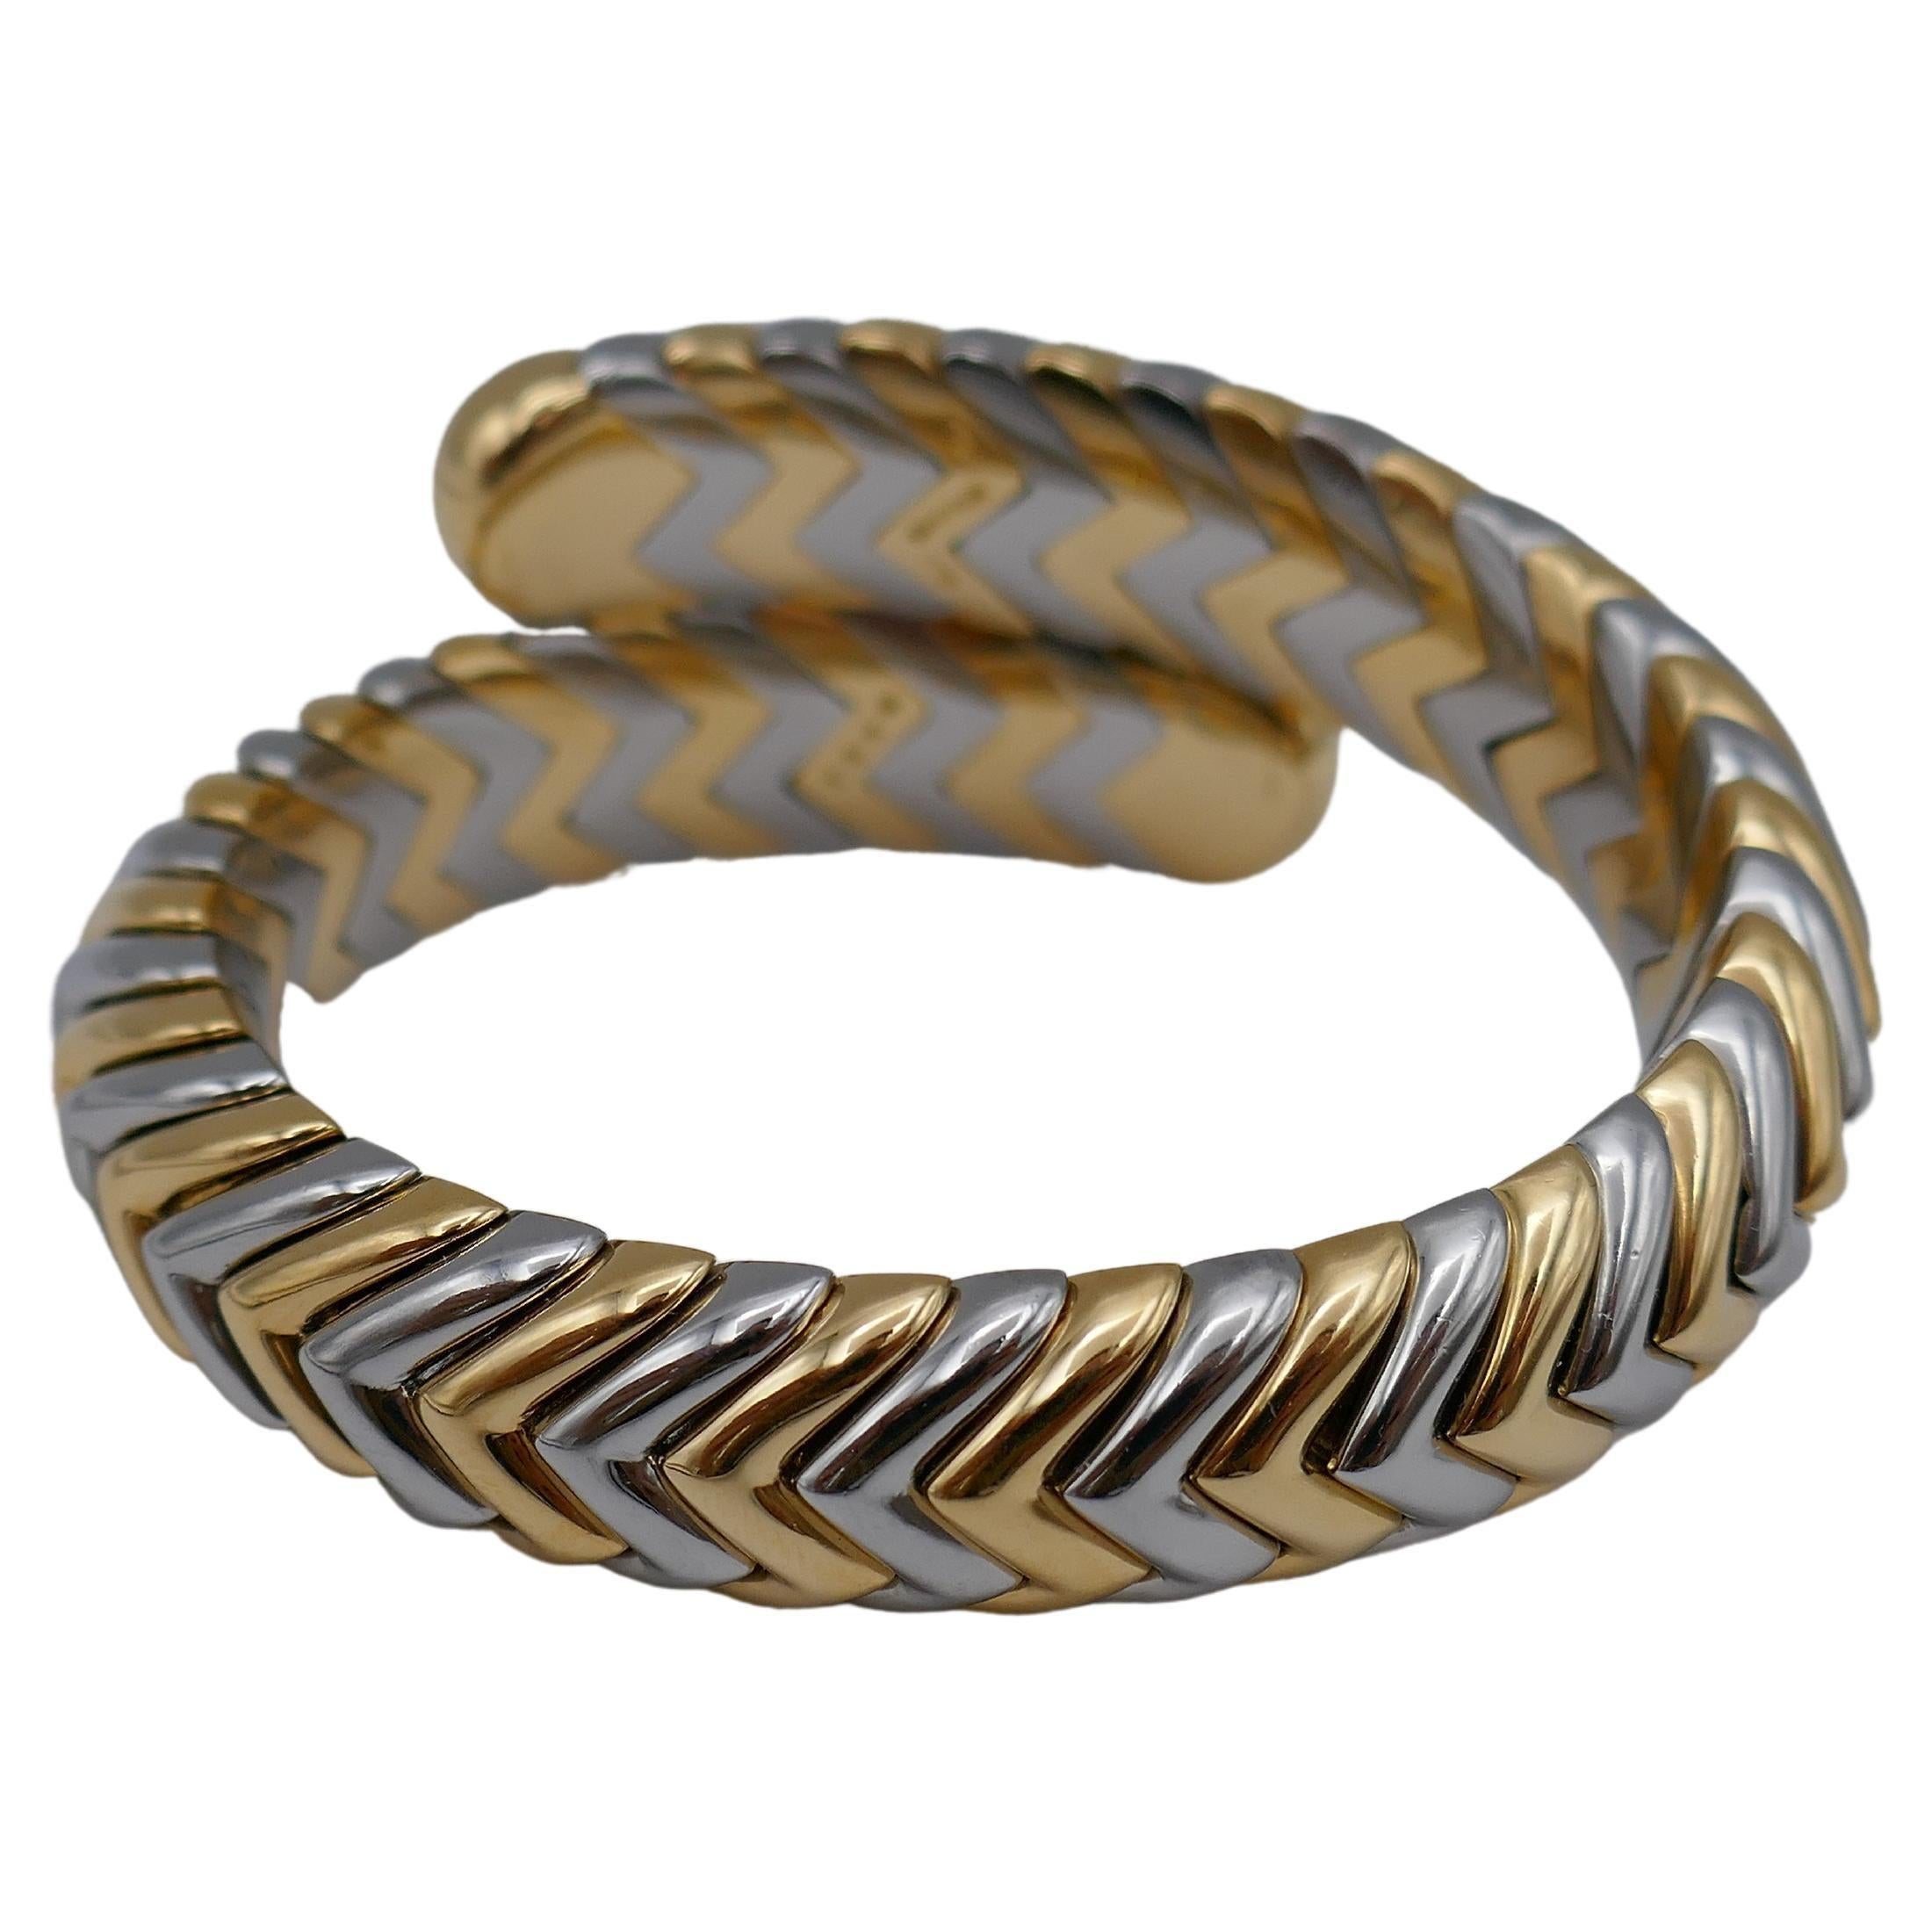 A celebrated Bulgari Spiga bracelet made of 18k gold and stainless steel.
Bulgari staple Spiga design implemented in the bypass Spiga bracelet. The coils are high-polished metal which creates a luxurious, glossy surface.
The herringbone links are